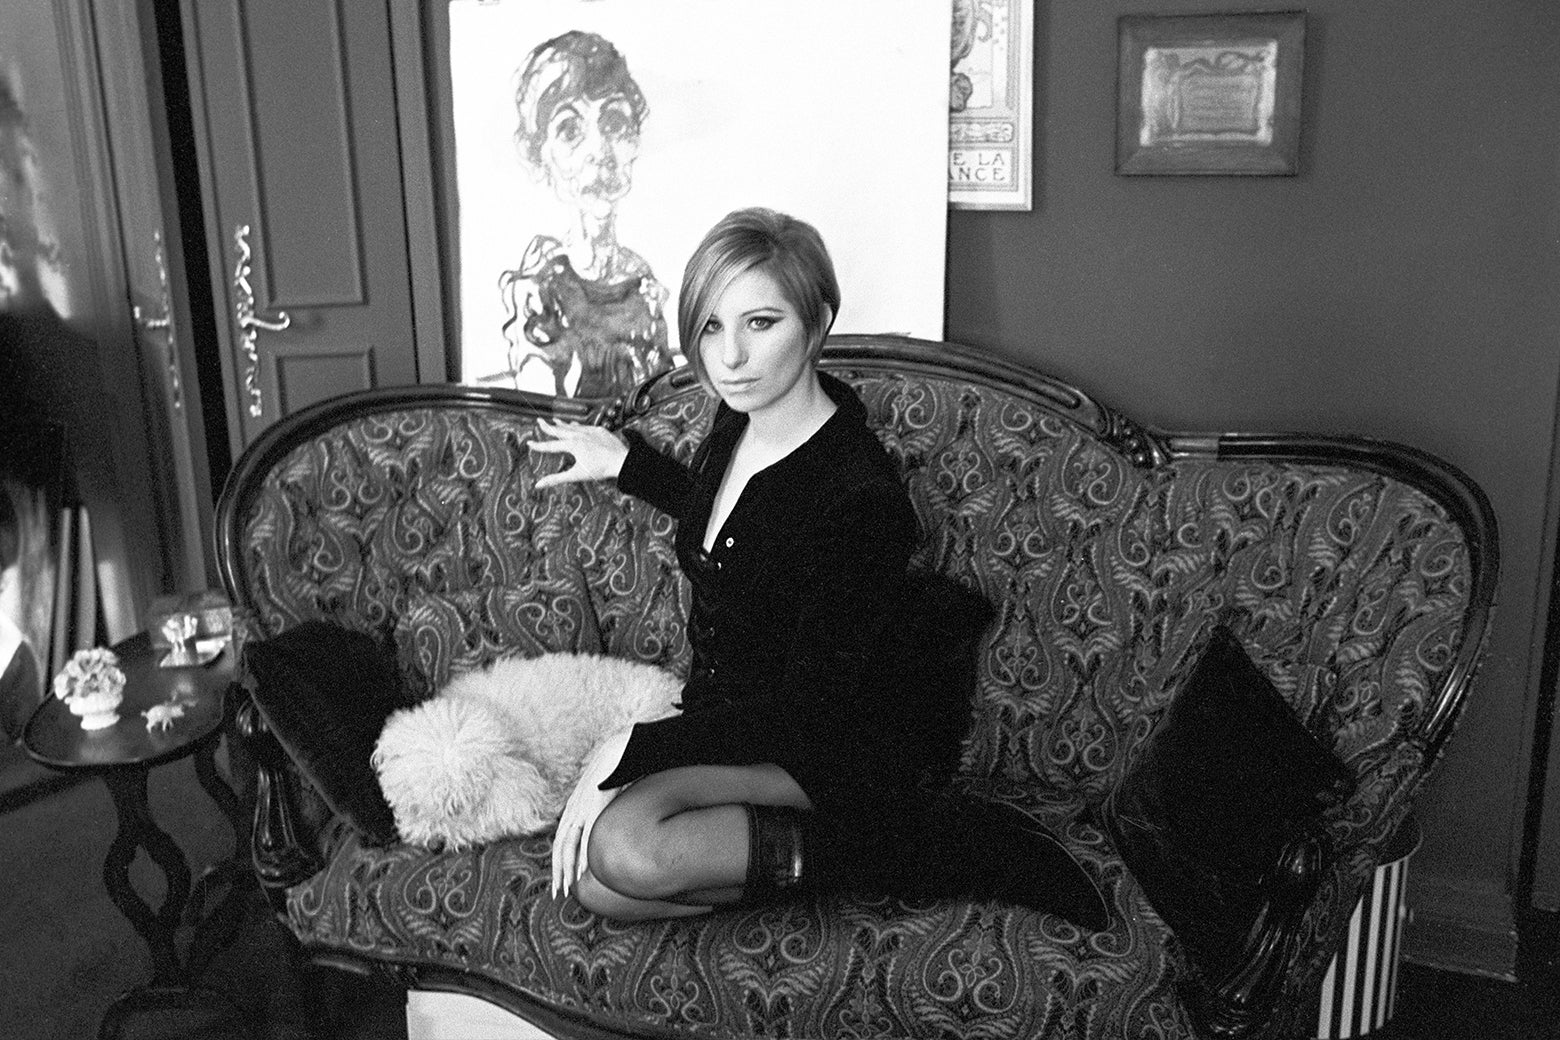 Barbra Streisand, in a 1960s-era bob and knee-high boots and tights, sits on a paisley couch with a white dog.